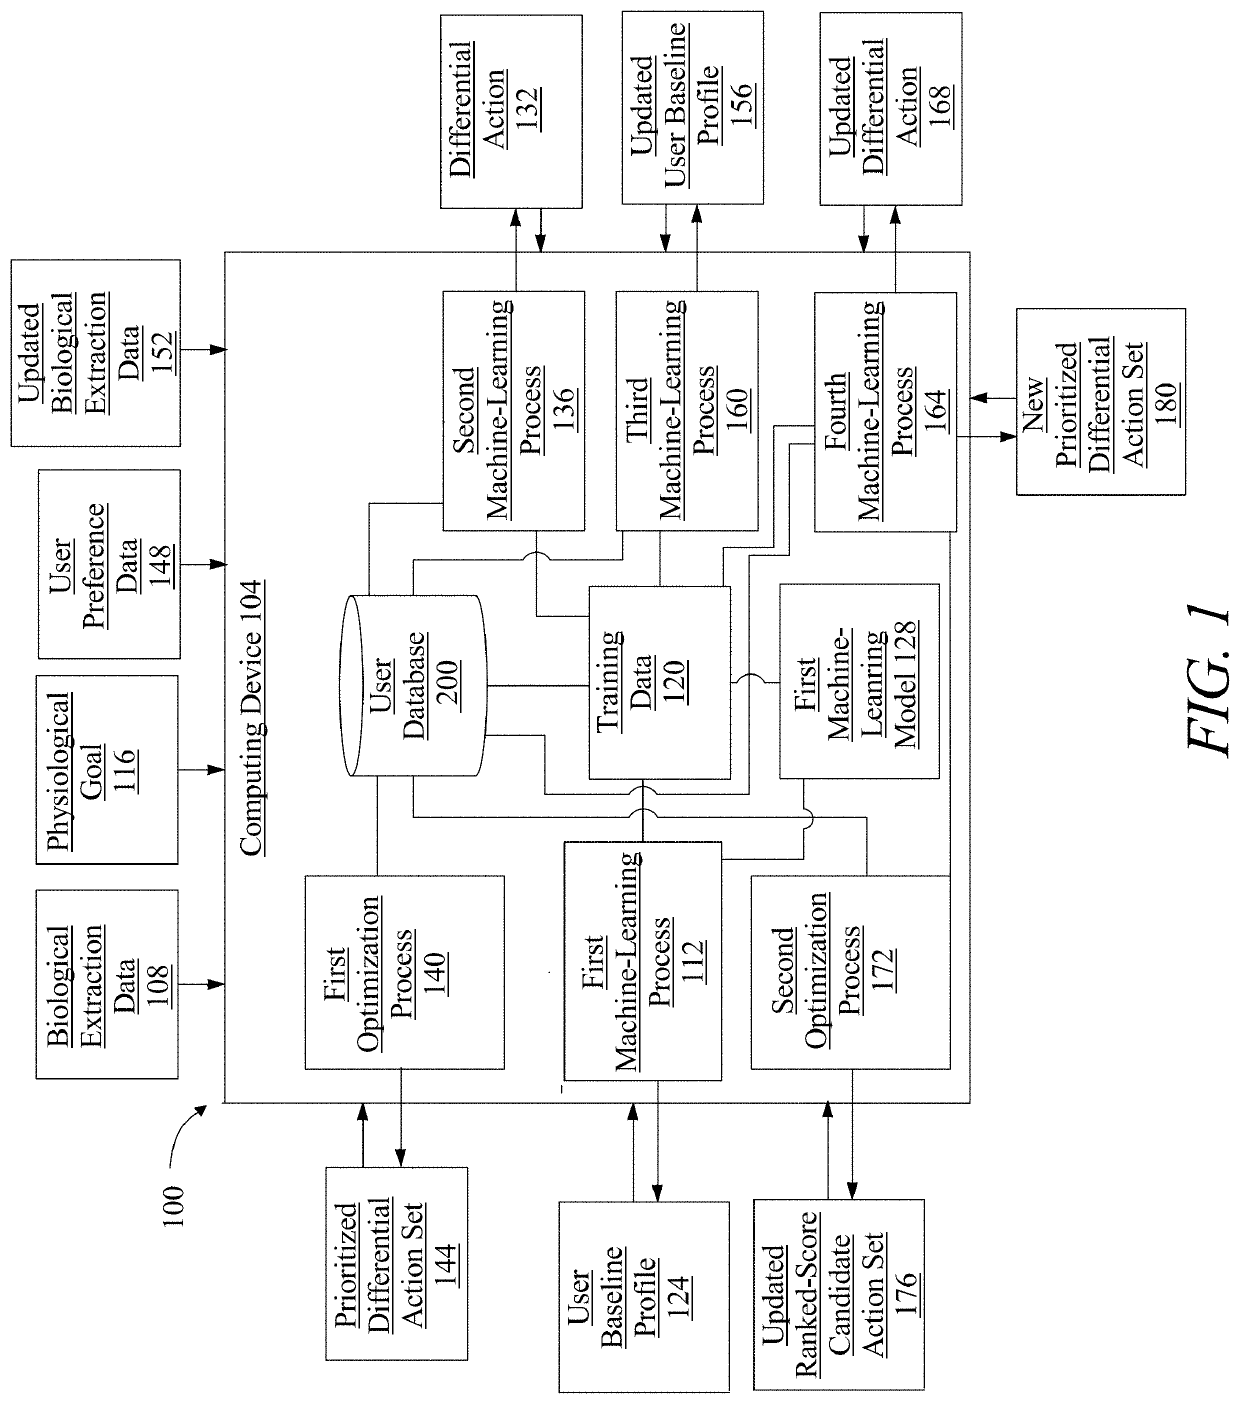 Method of and system for determining a prioritized instruction set for a user